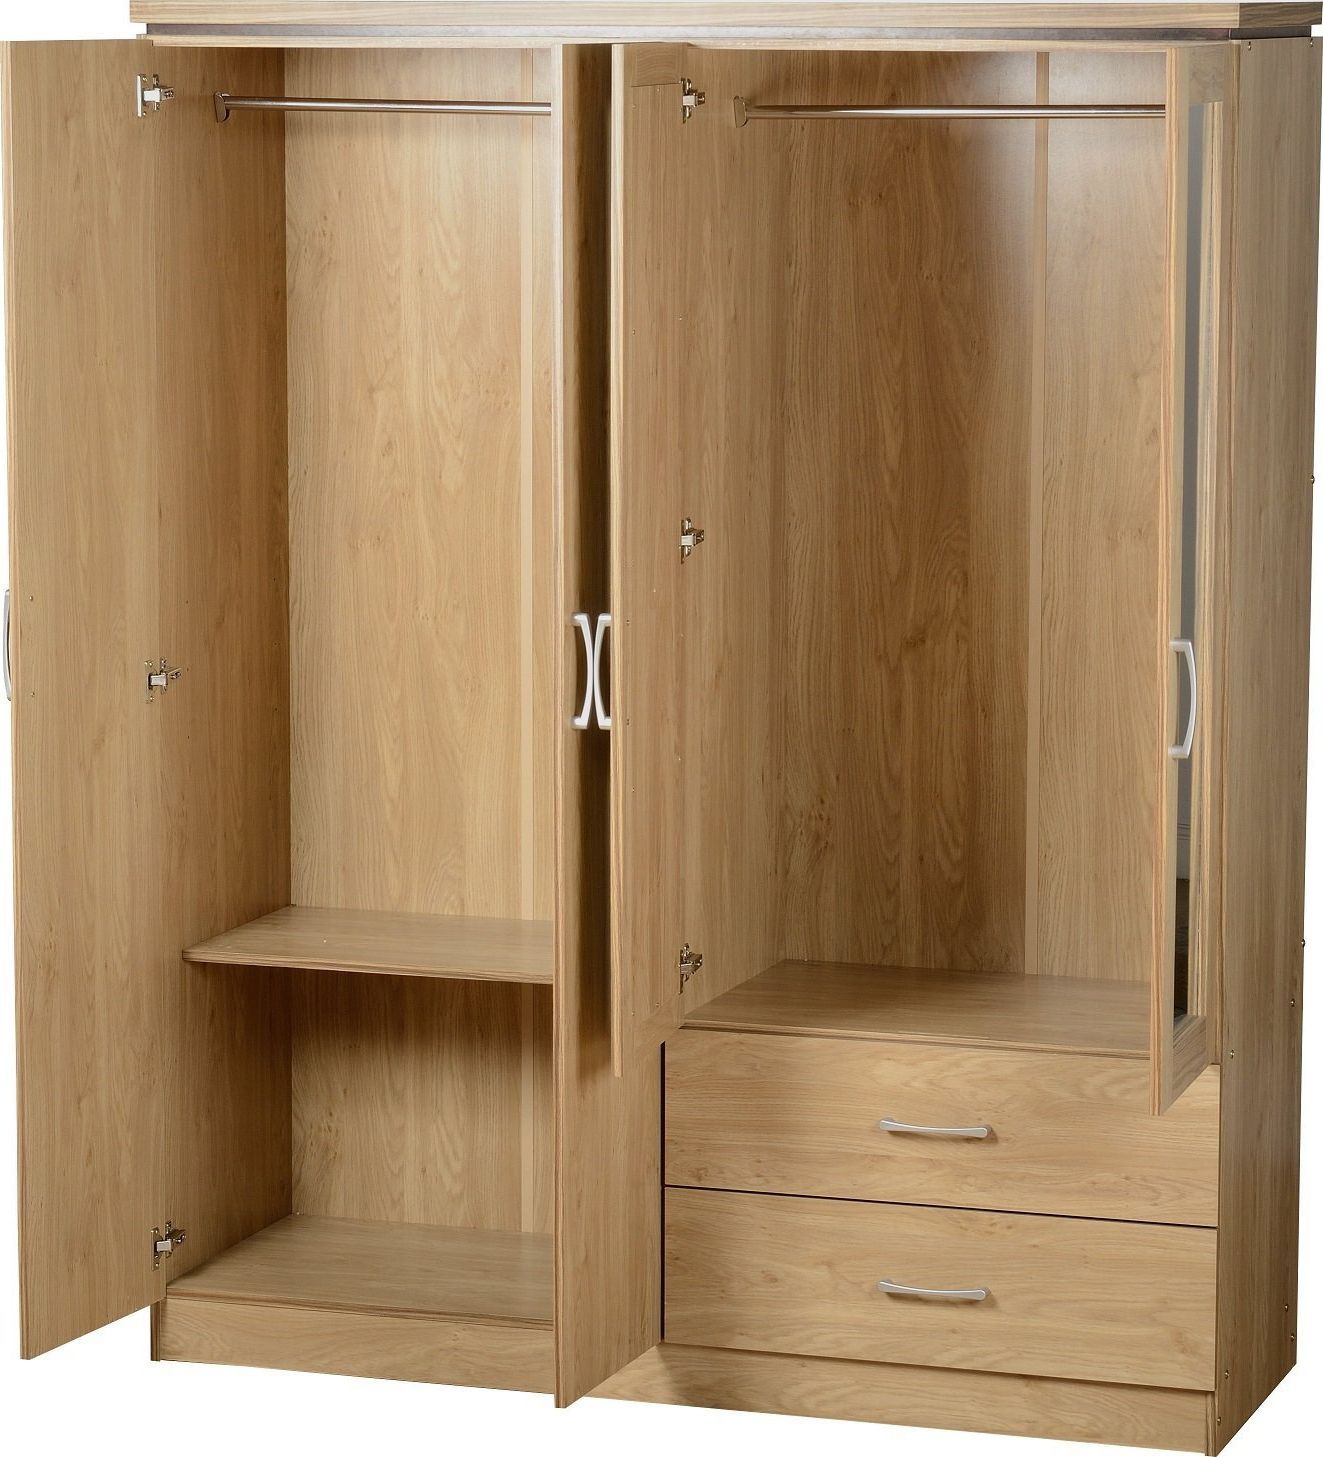 Wooden Wardrobe M0222 • Ro2ya Home Pertaining To Wooden Wardrobes (View 15 of 20)